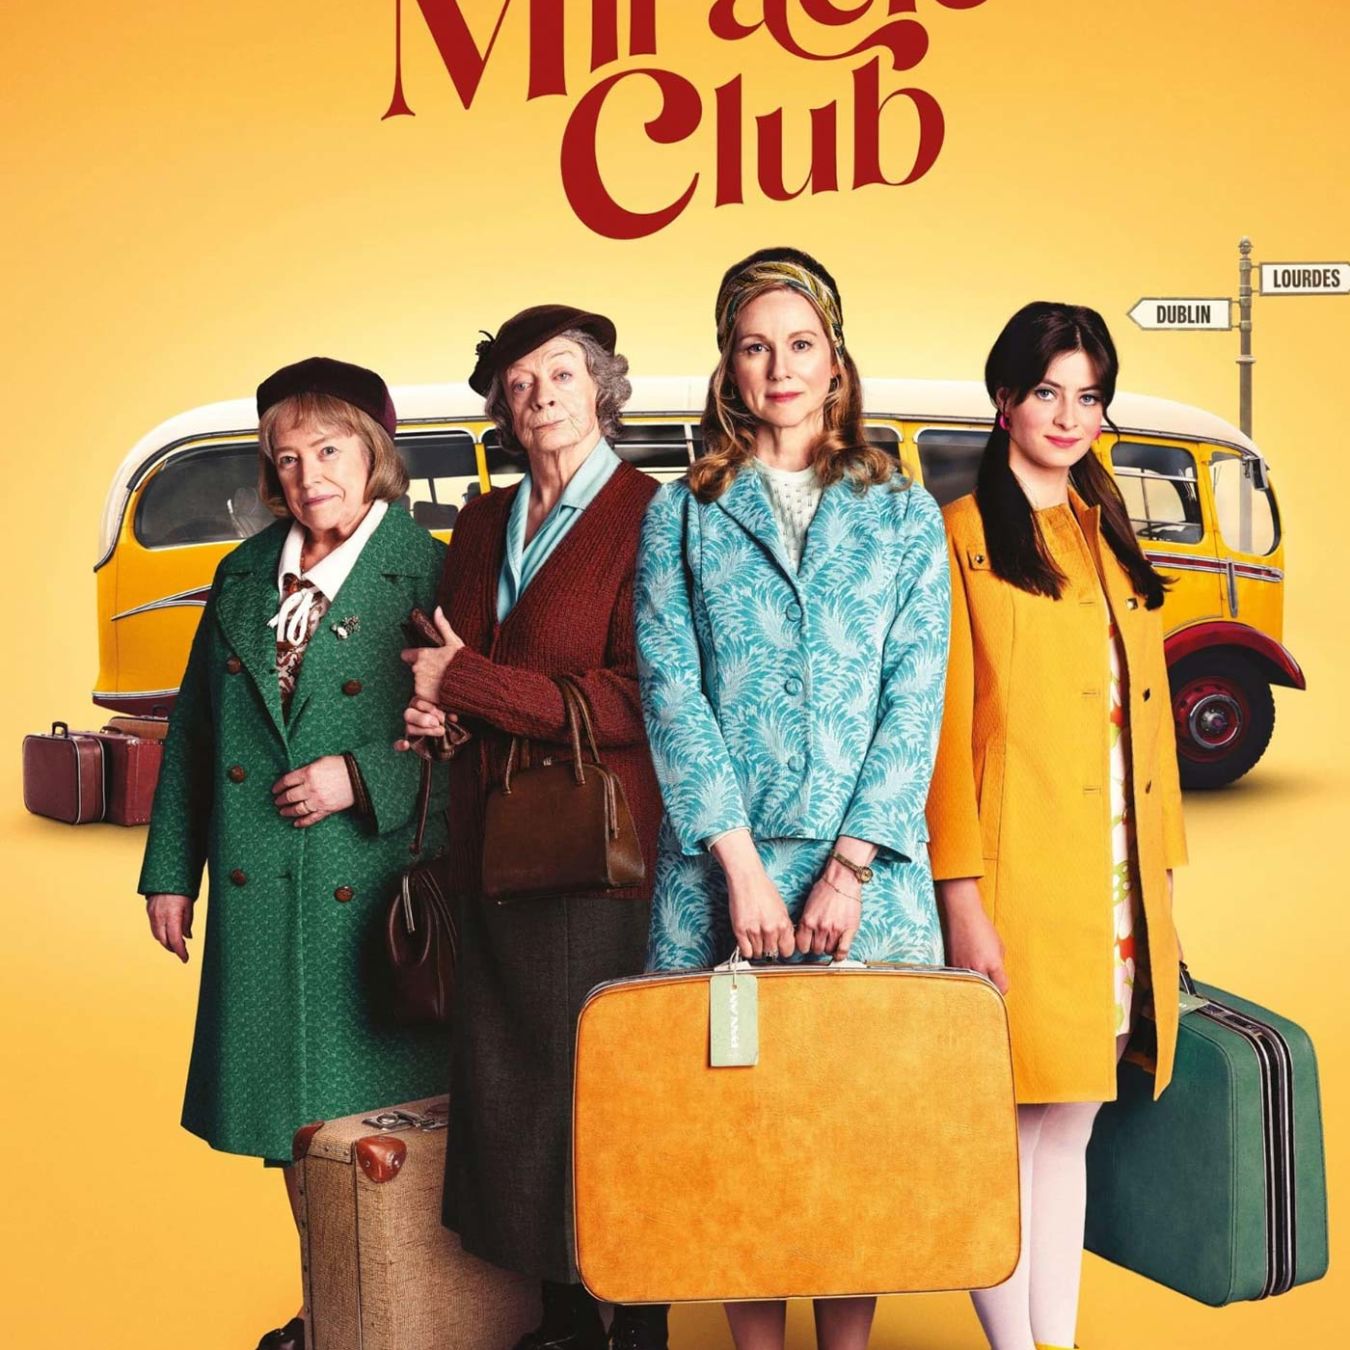 Poster for The Miracle Club